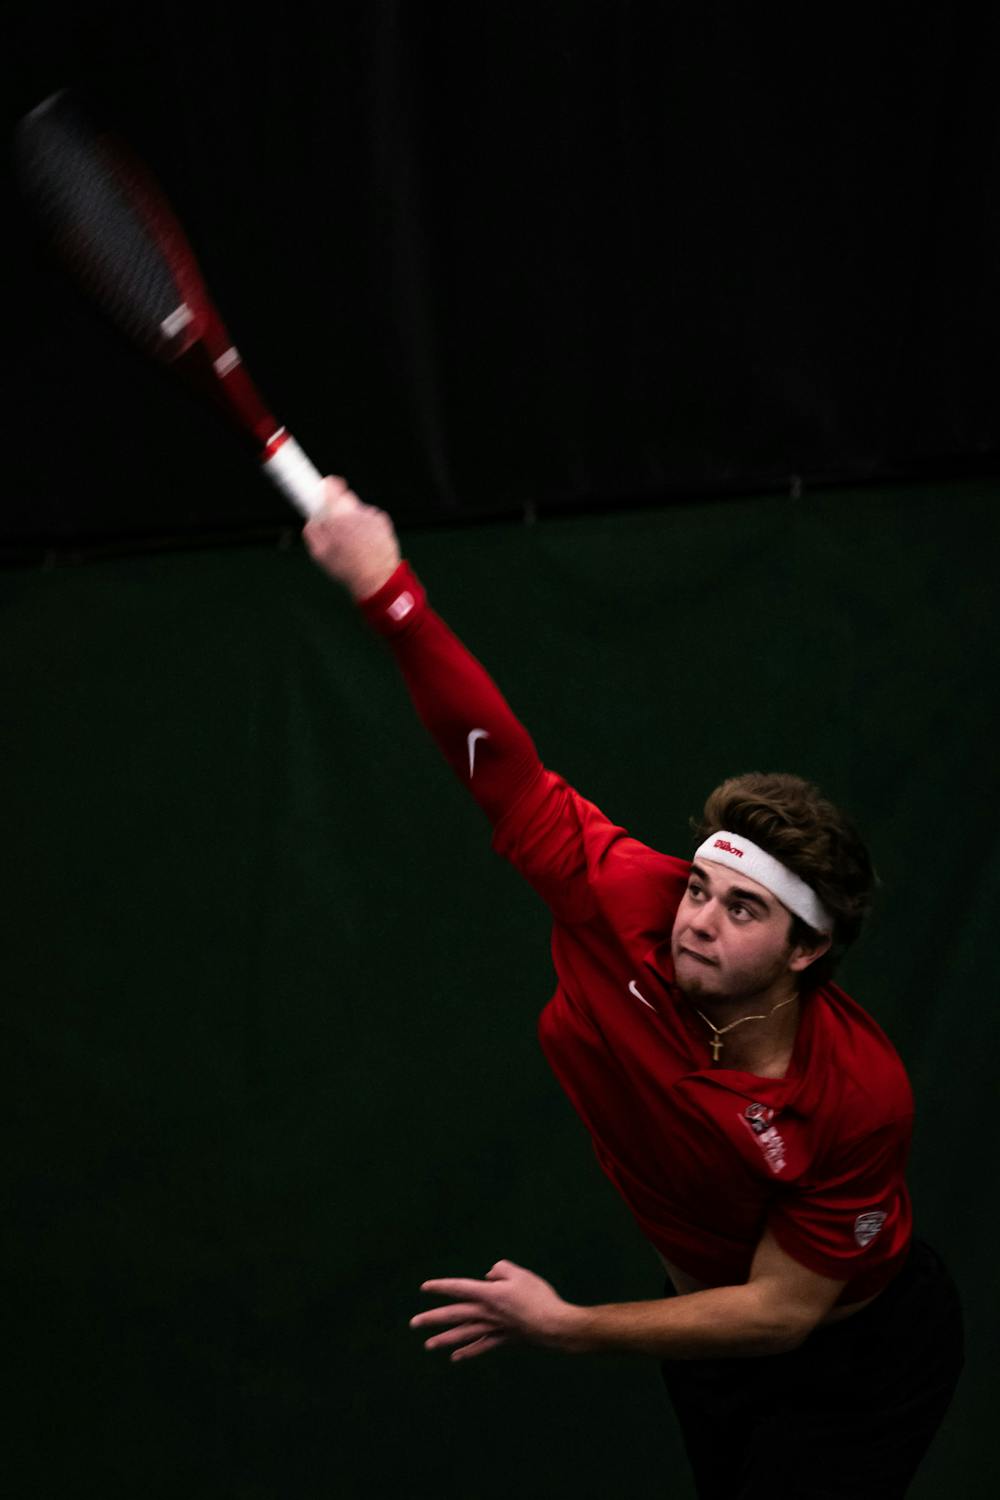 Ball State Men’s Tennis opens campaign with sweep of Eastern Illinois